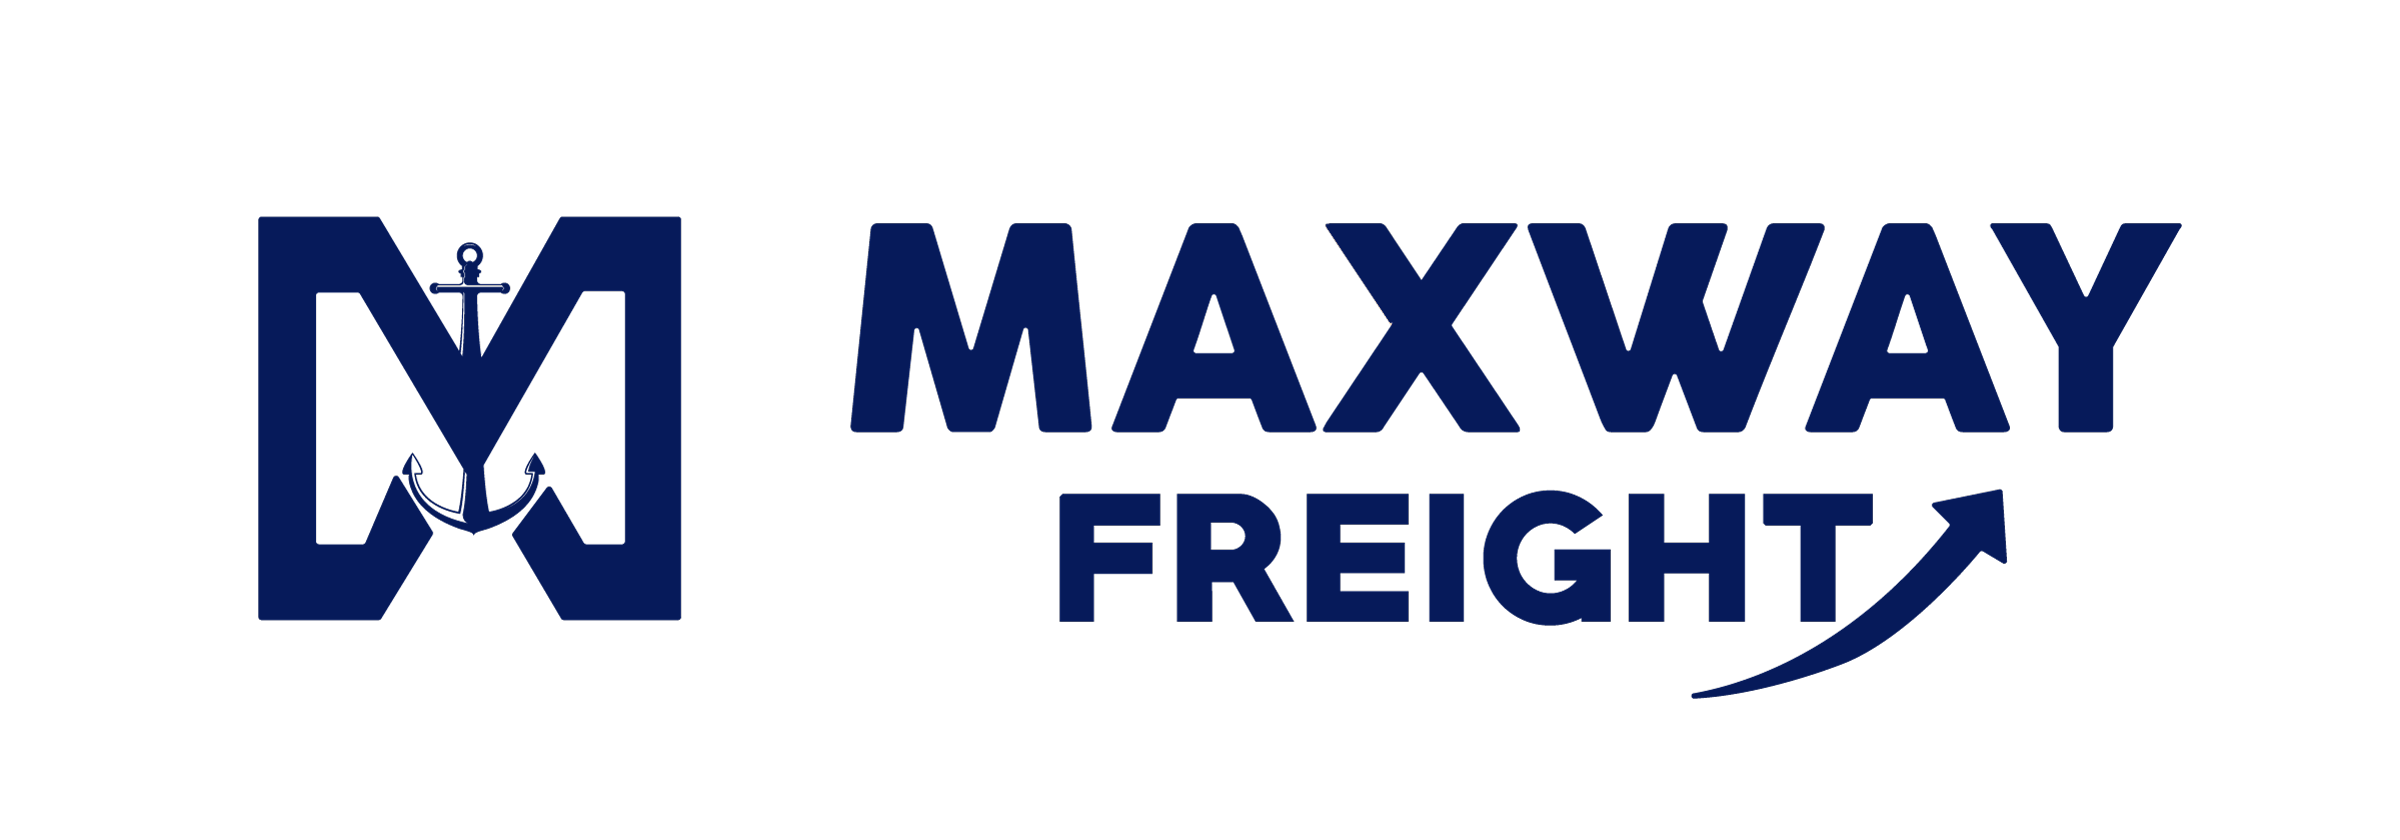 Maxway Freight Services